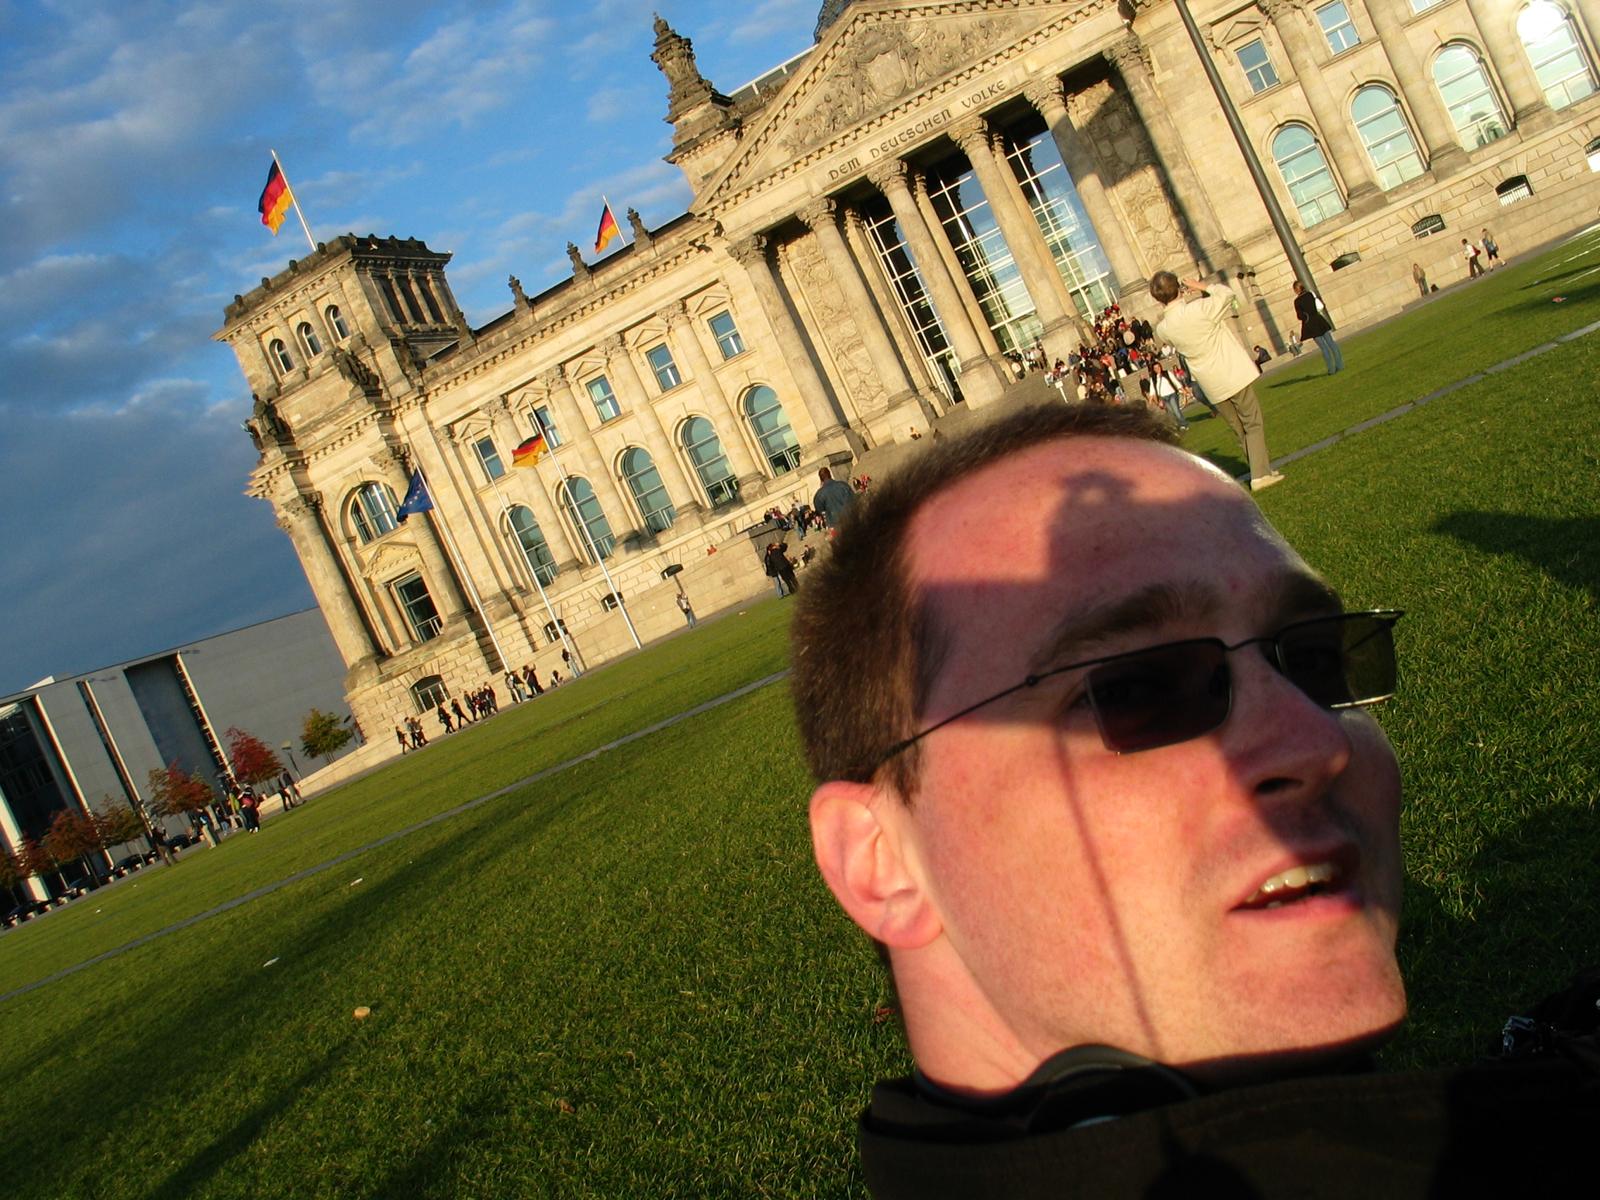 The Reichstag and me